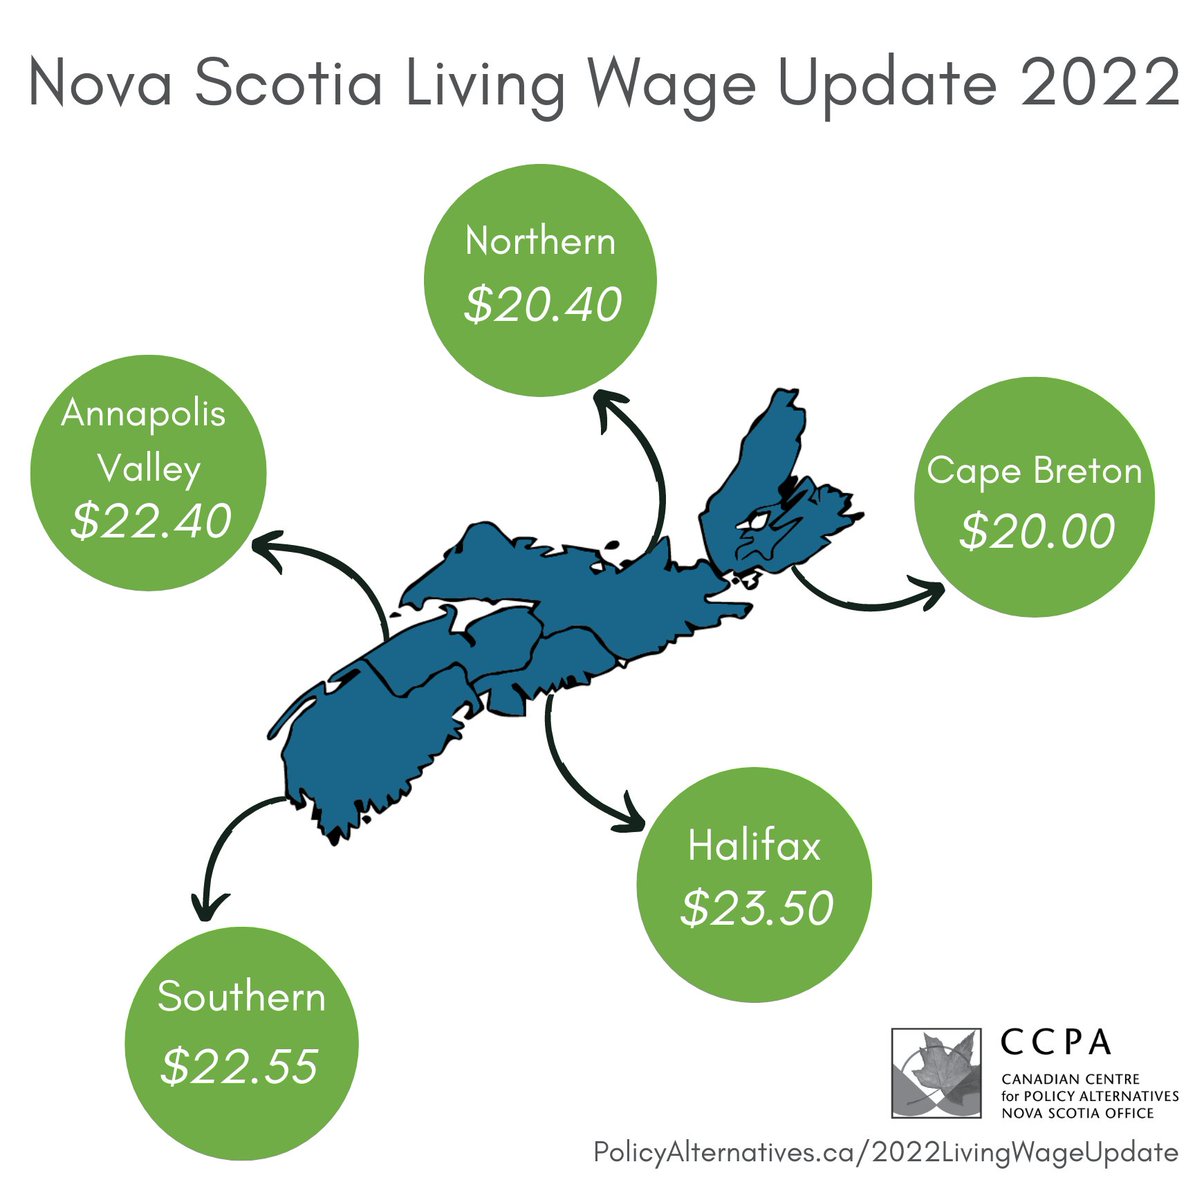 Just released, Nova Scotia Living Wages for 2022: Annapolis Valley: $22.40, Cape Breton: $20.00, Halifax: $23.50, Northern: $20.40, and Southern: $22.55. #NSpoli #LivingWage Access the full report here: policyalternatives.ca/2022Livingwage…